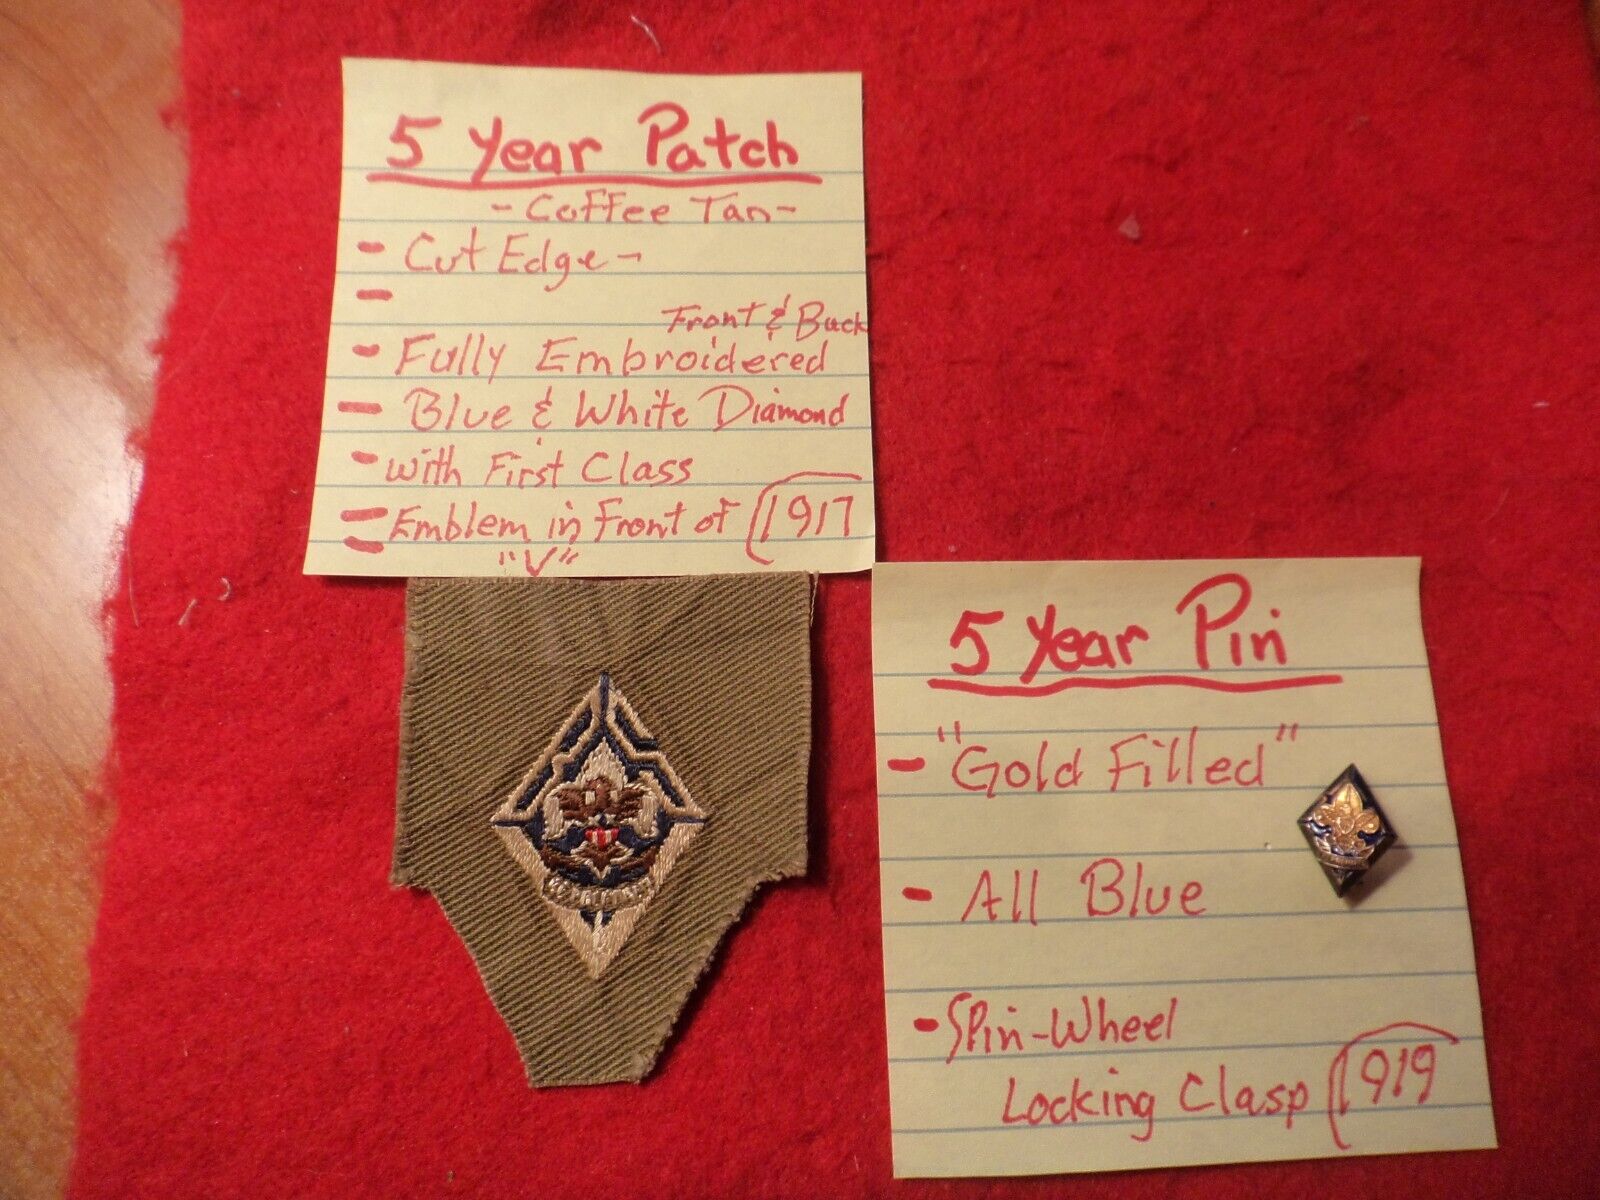 *****SUPER-DUPER RARE OLD 1917  5 YEAR PATCH & 1919  5 YEAR VETERAN PIN (FILLED)